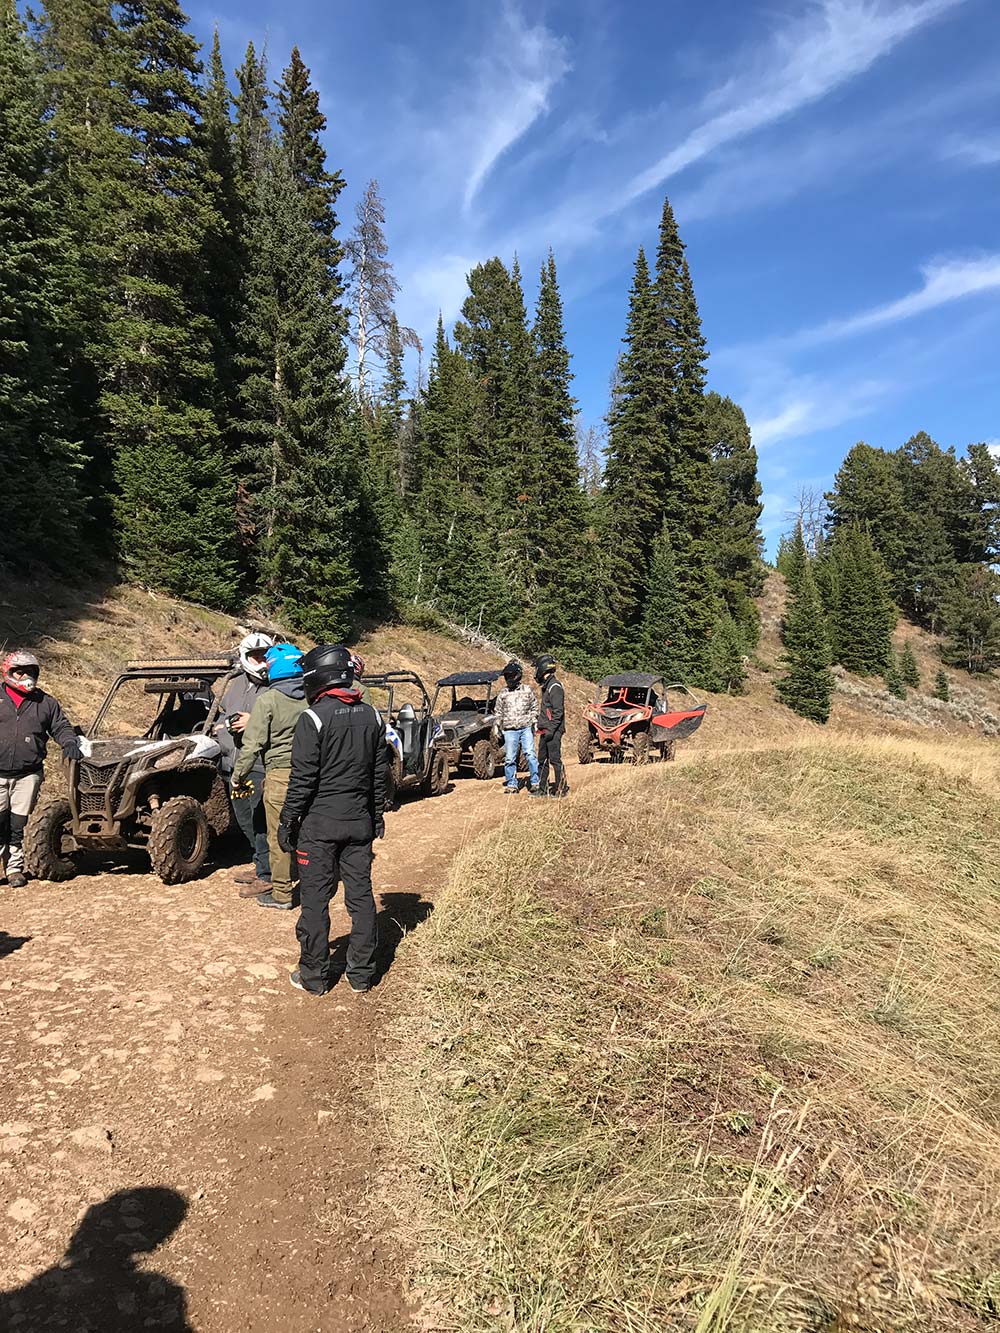 convoy of side by sides trail riding in montana